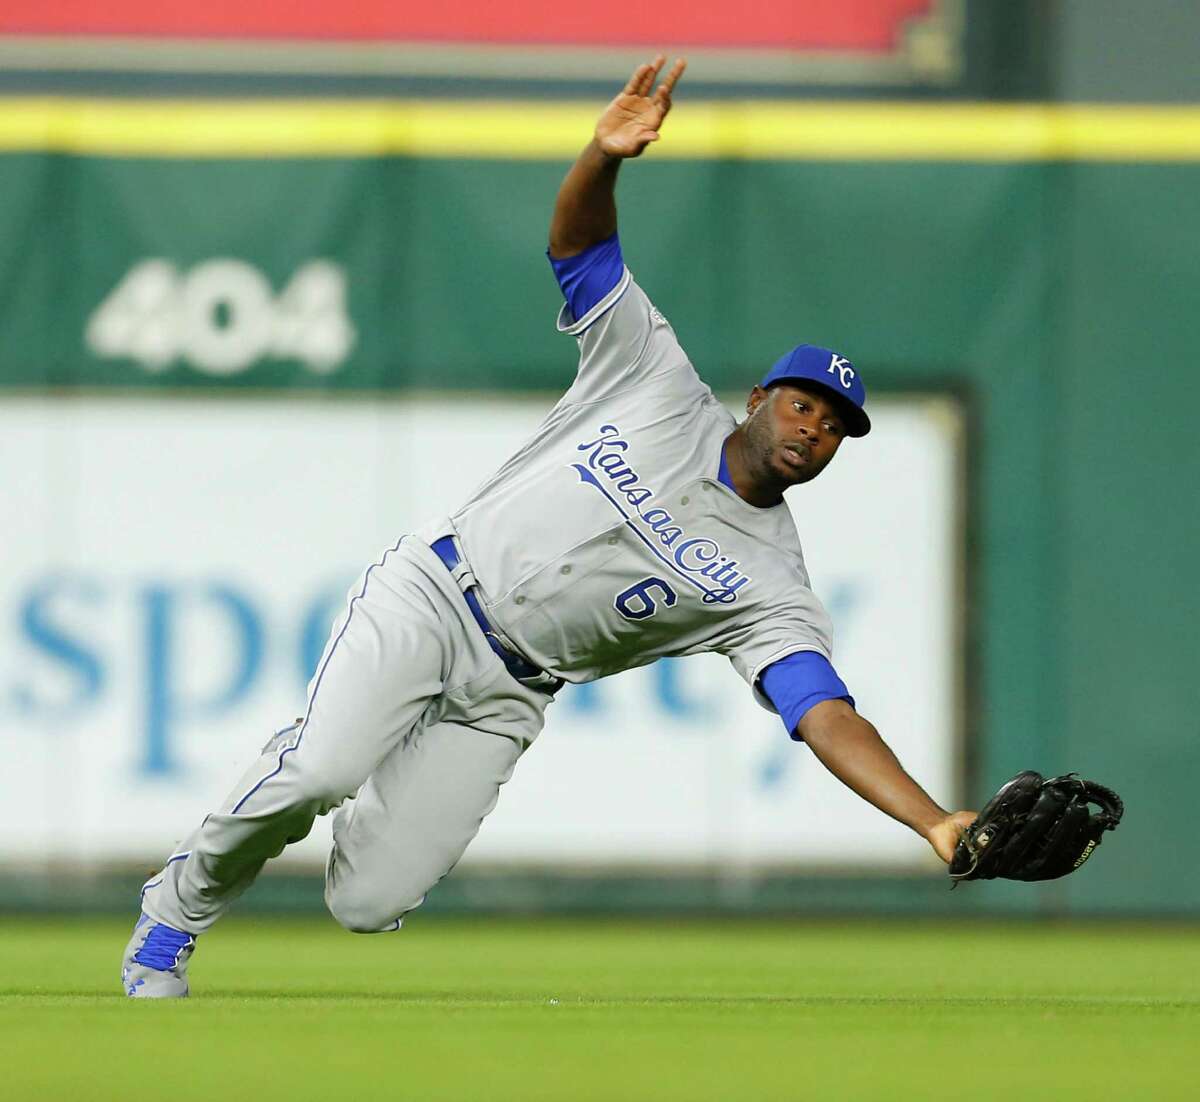 Royals center fielder Lorenzo Cain flashes his Gold Glove-winning form in tracking down a ball hit by Luis Valbuena in the fourth. Cain's three-run homer in the first accounted for all the Royals' runs.